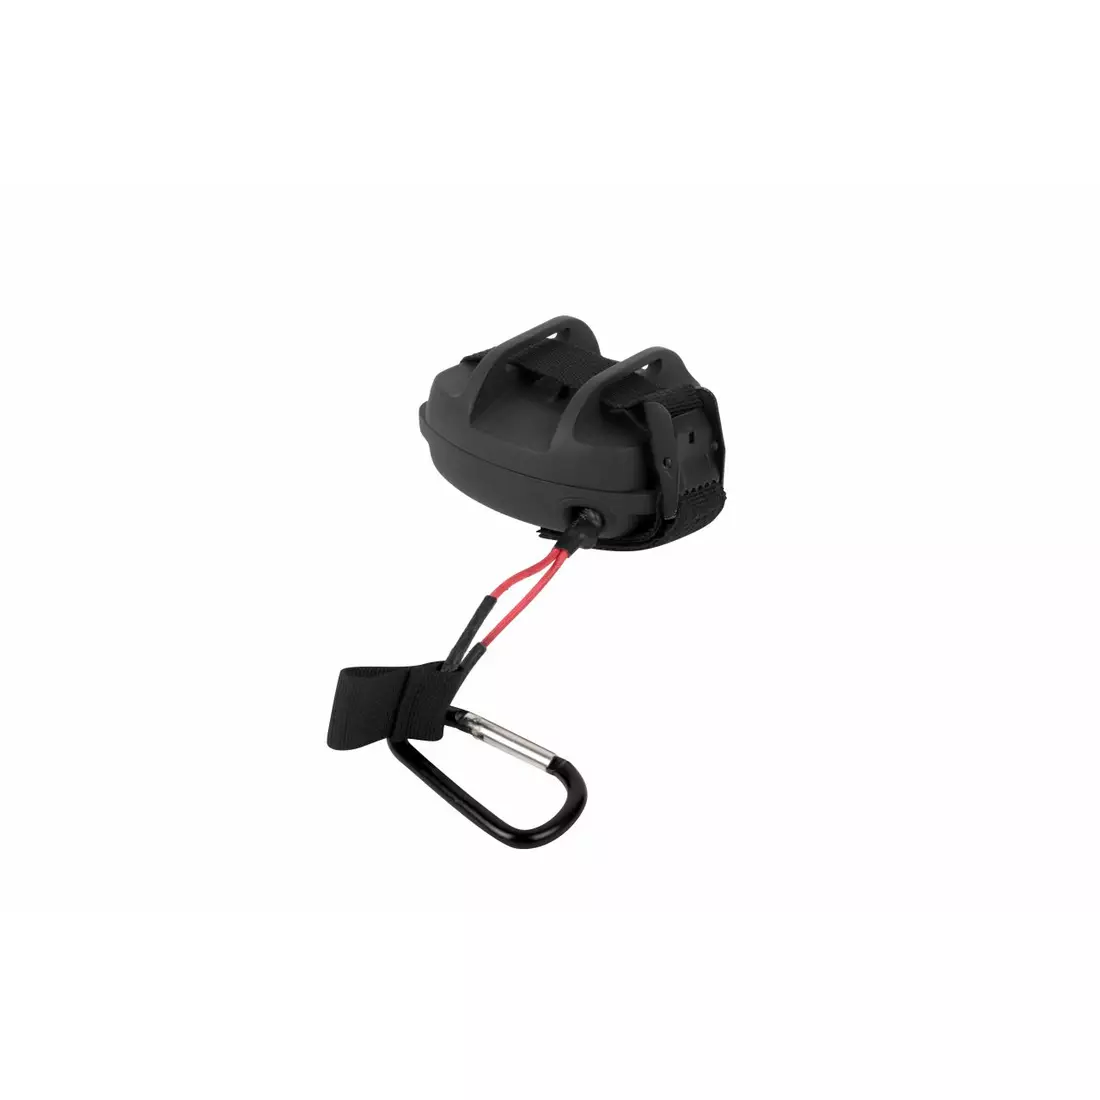 Zefal Bike Taxi Tow Rope buy online - bike-components